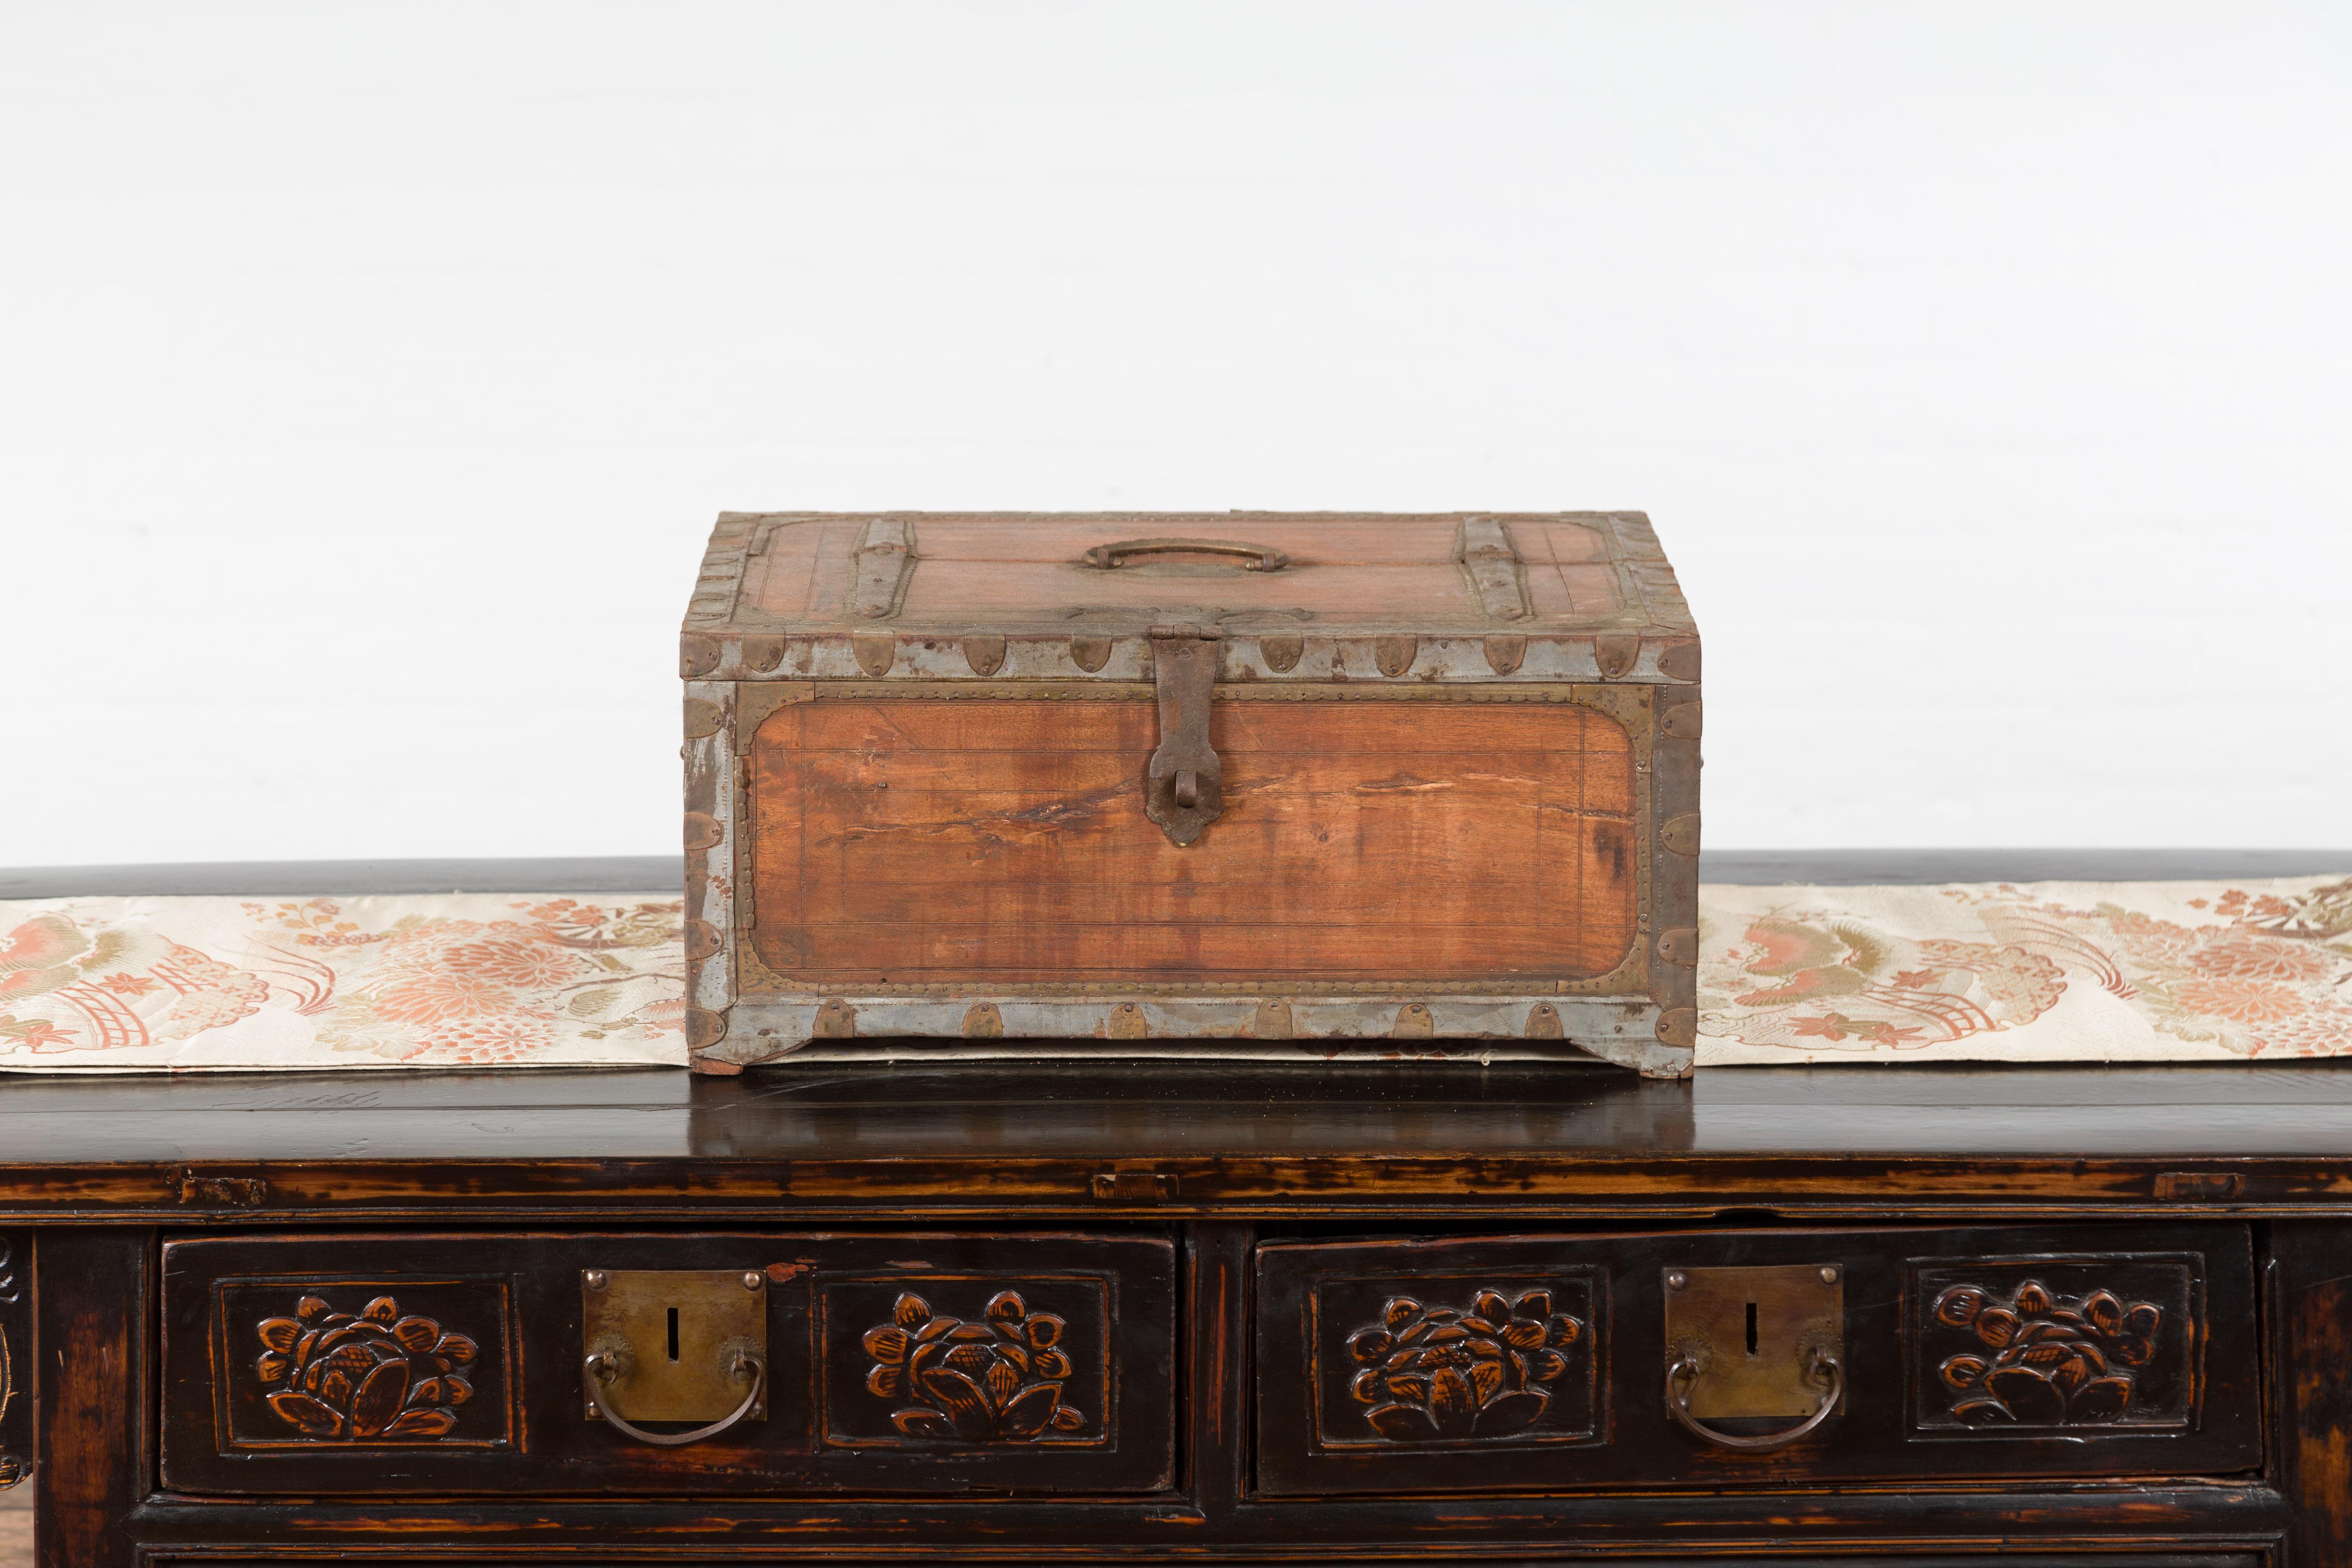 An antique Indian wooden box from the 19th century, with brass details and weathered appearance. Topped with a rectangular lid fitted with a c-scroll handle and half opening to reveal a small distressed interior with side partitioned compartment,